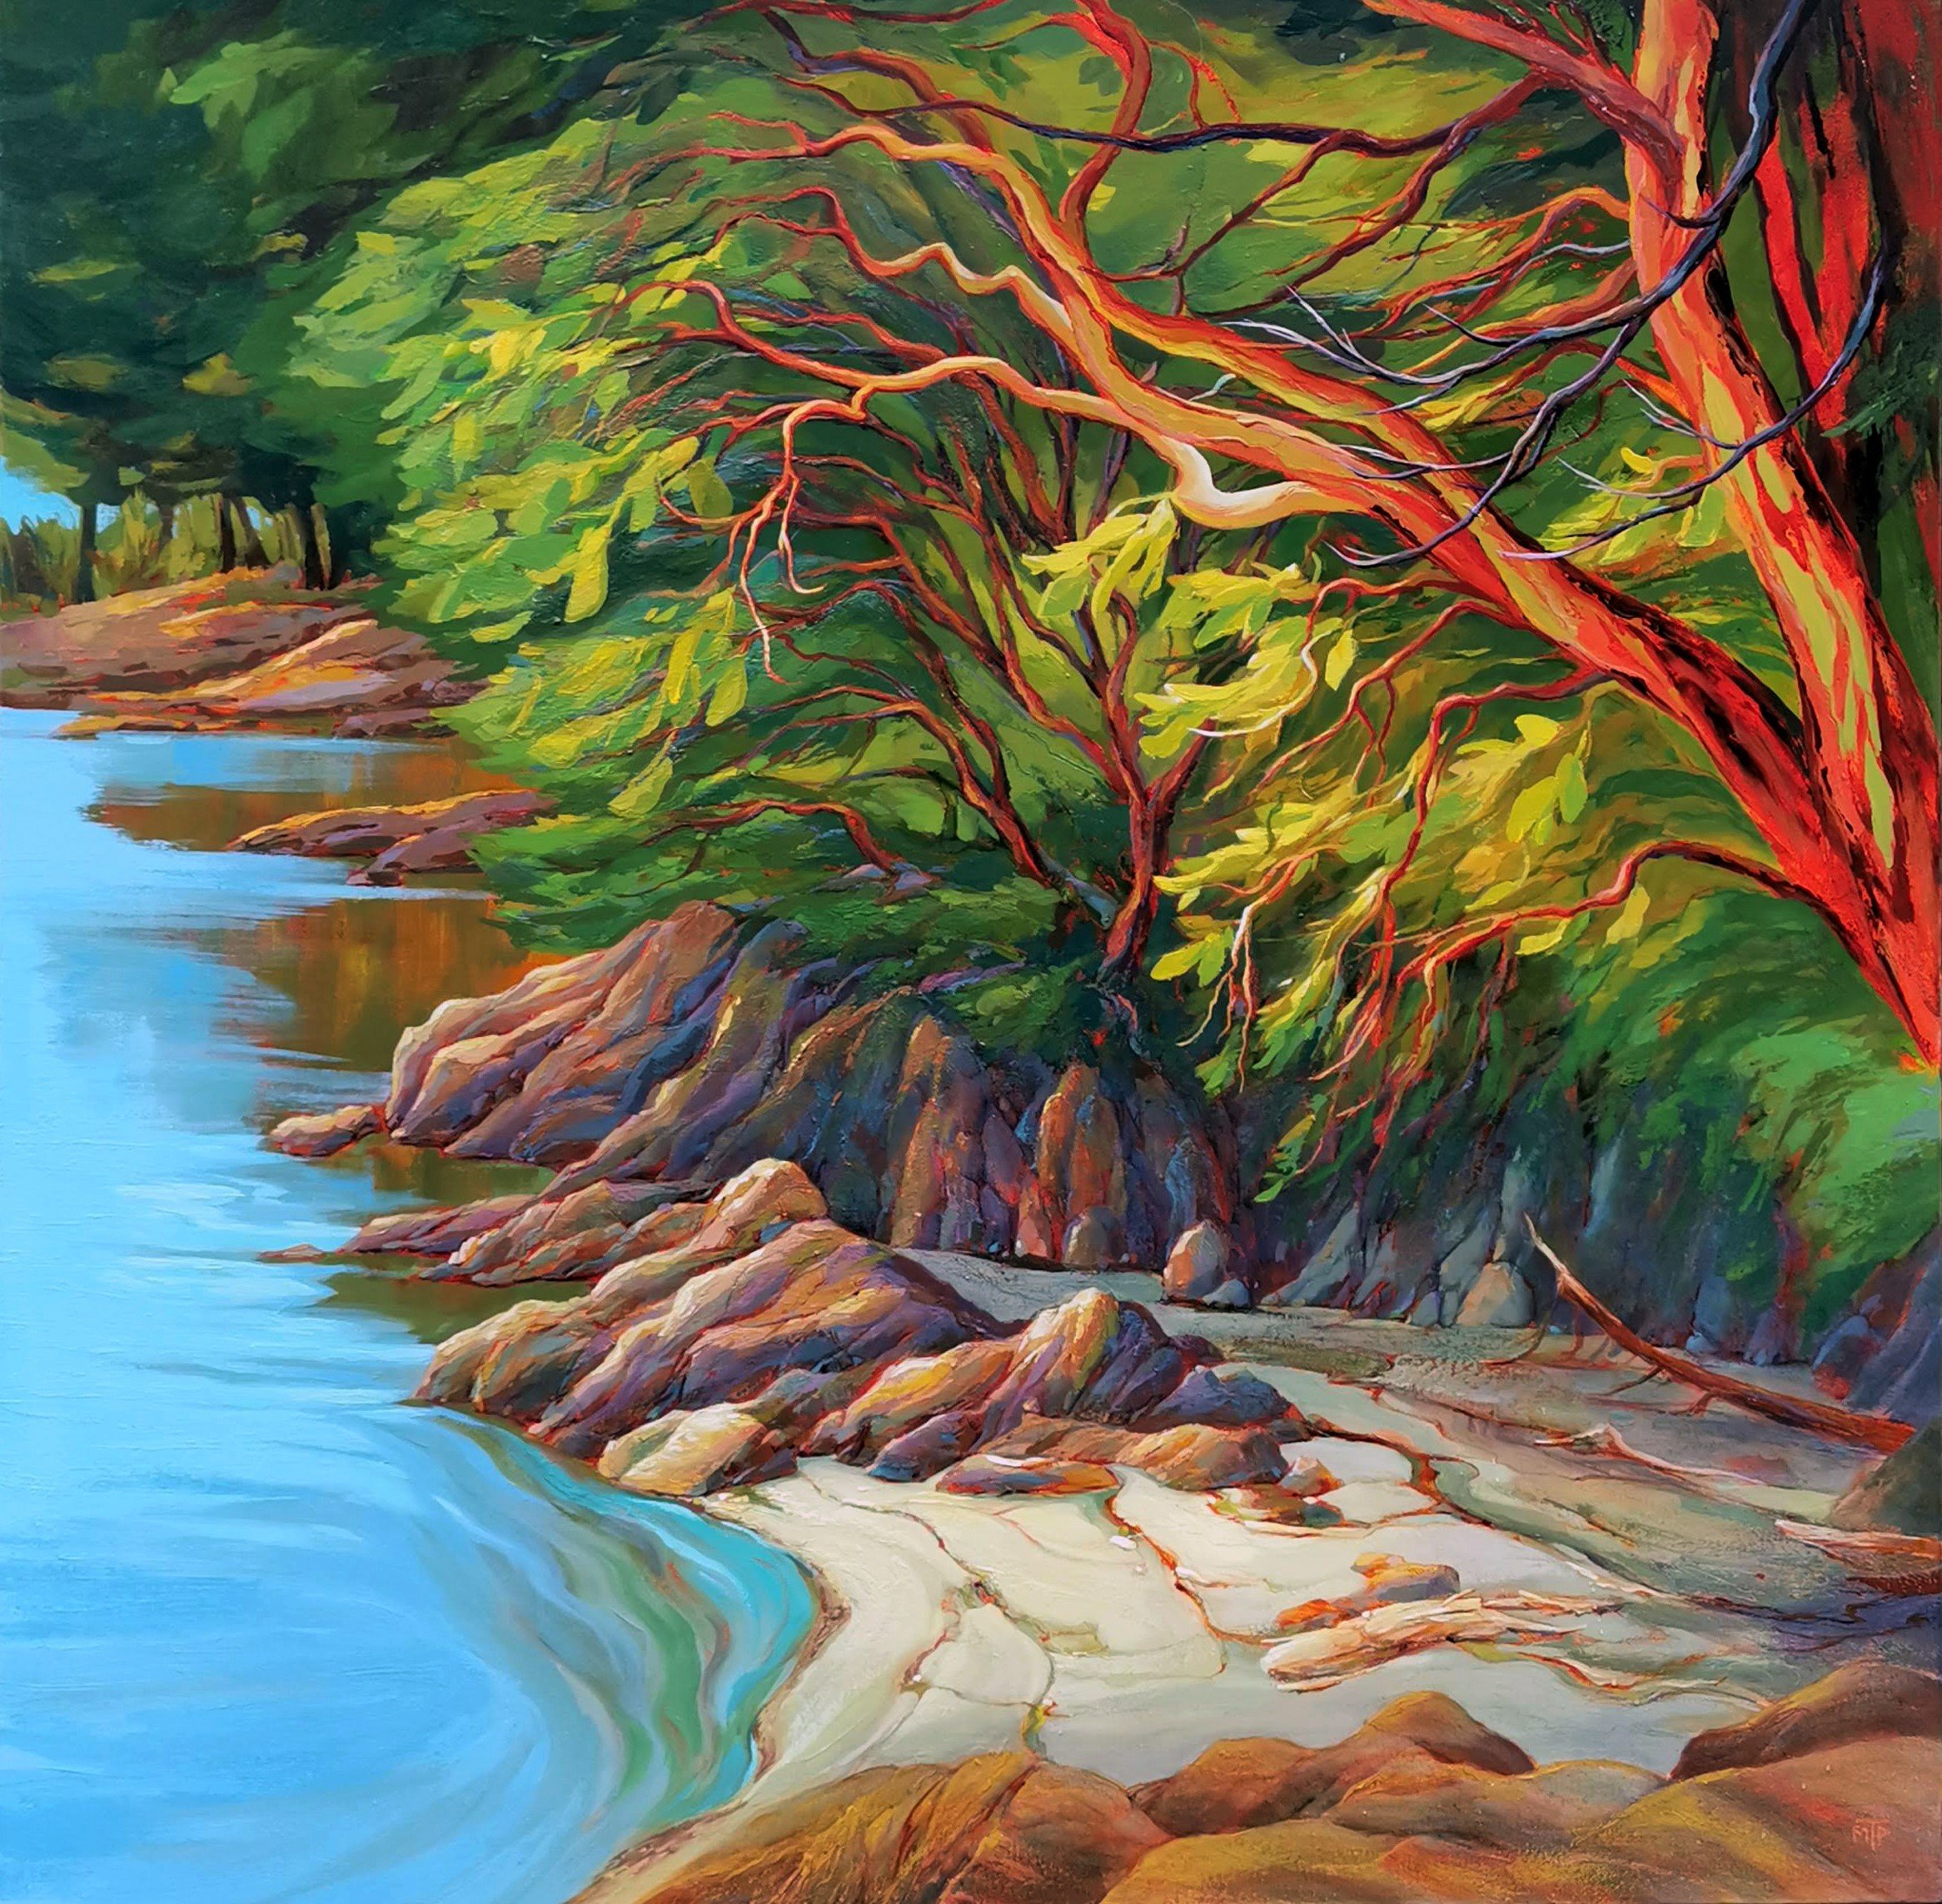  Arbutus Cove    Acrylic on canvas, 48x48 inches, $6,500  